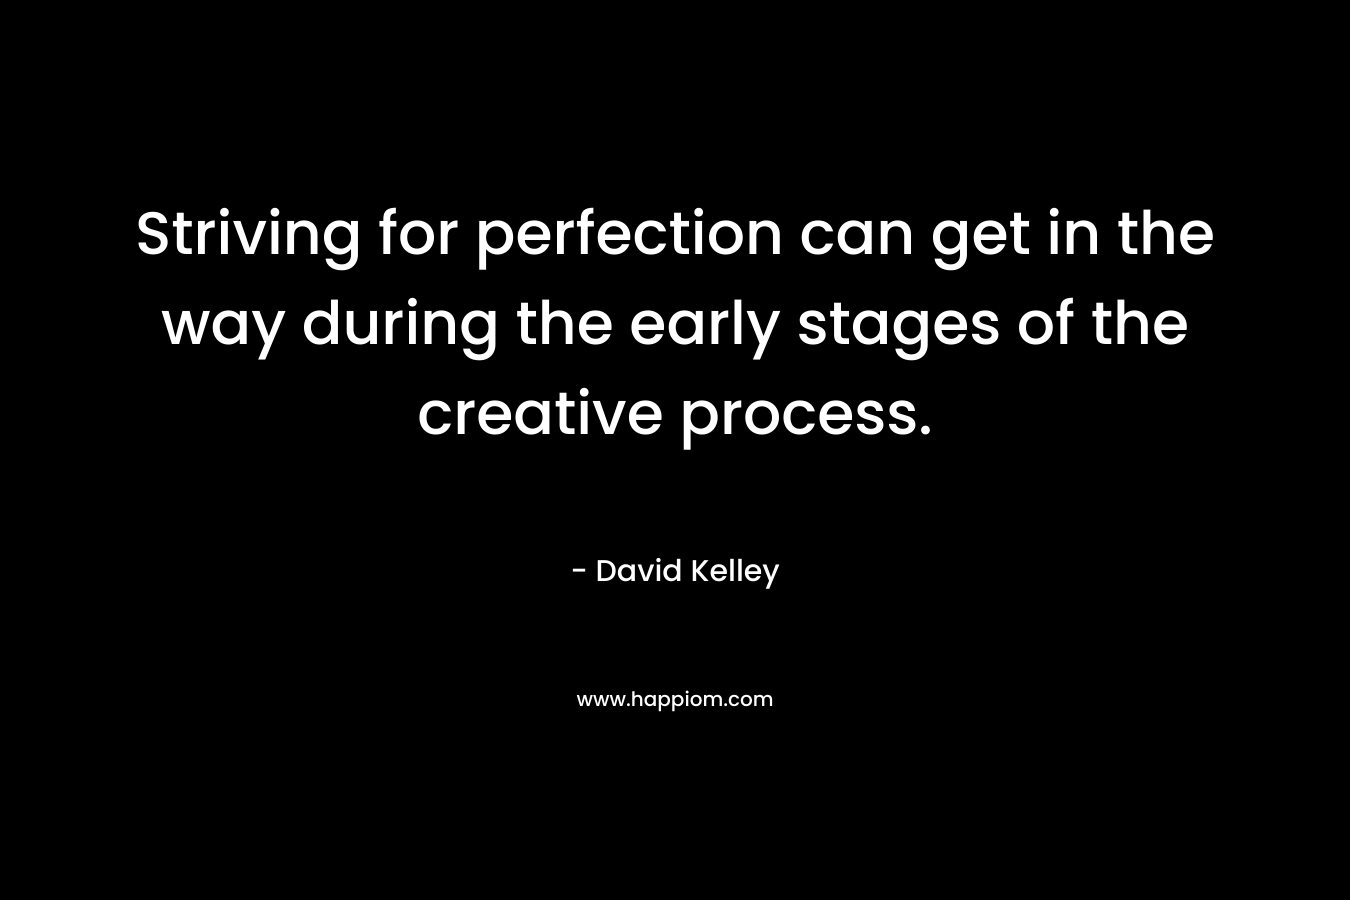 Striving for perfection can get in the way during the early stages of the creative process. – David Kelley